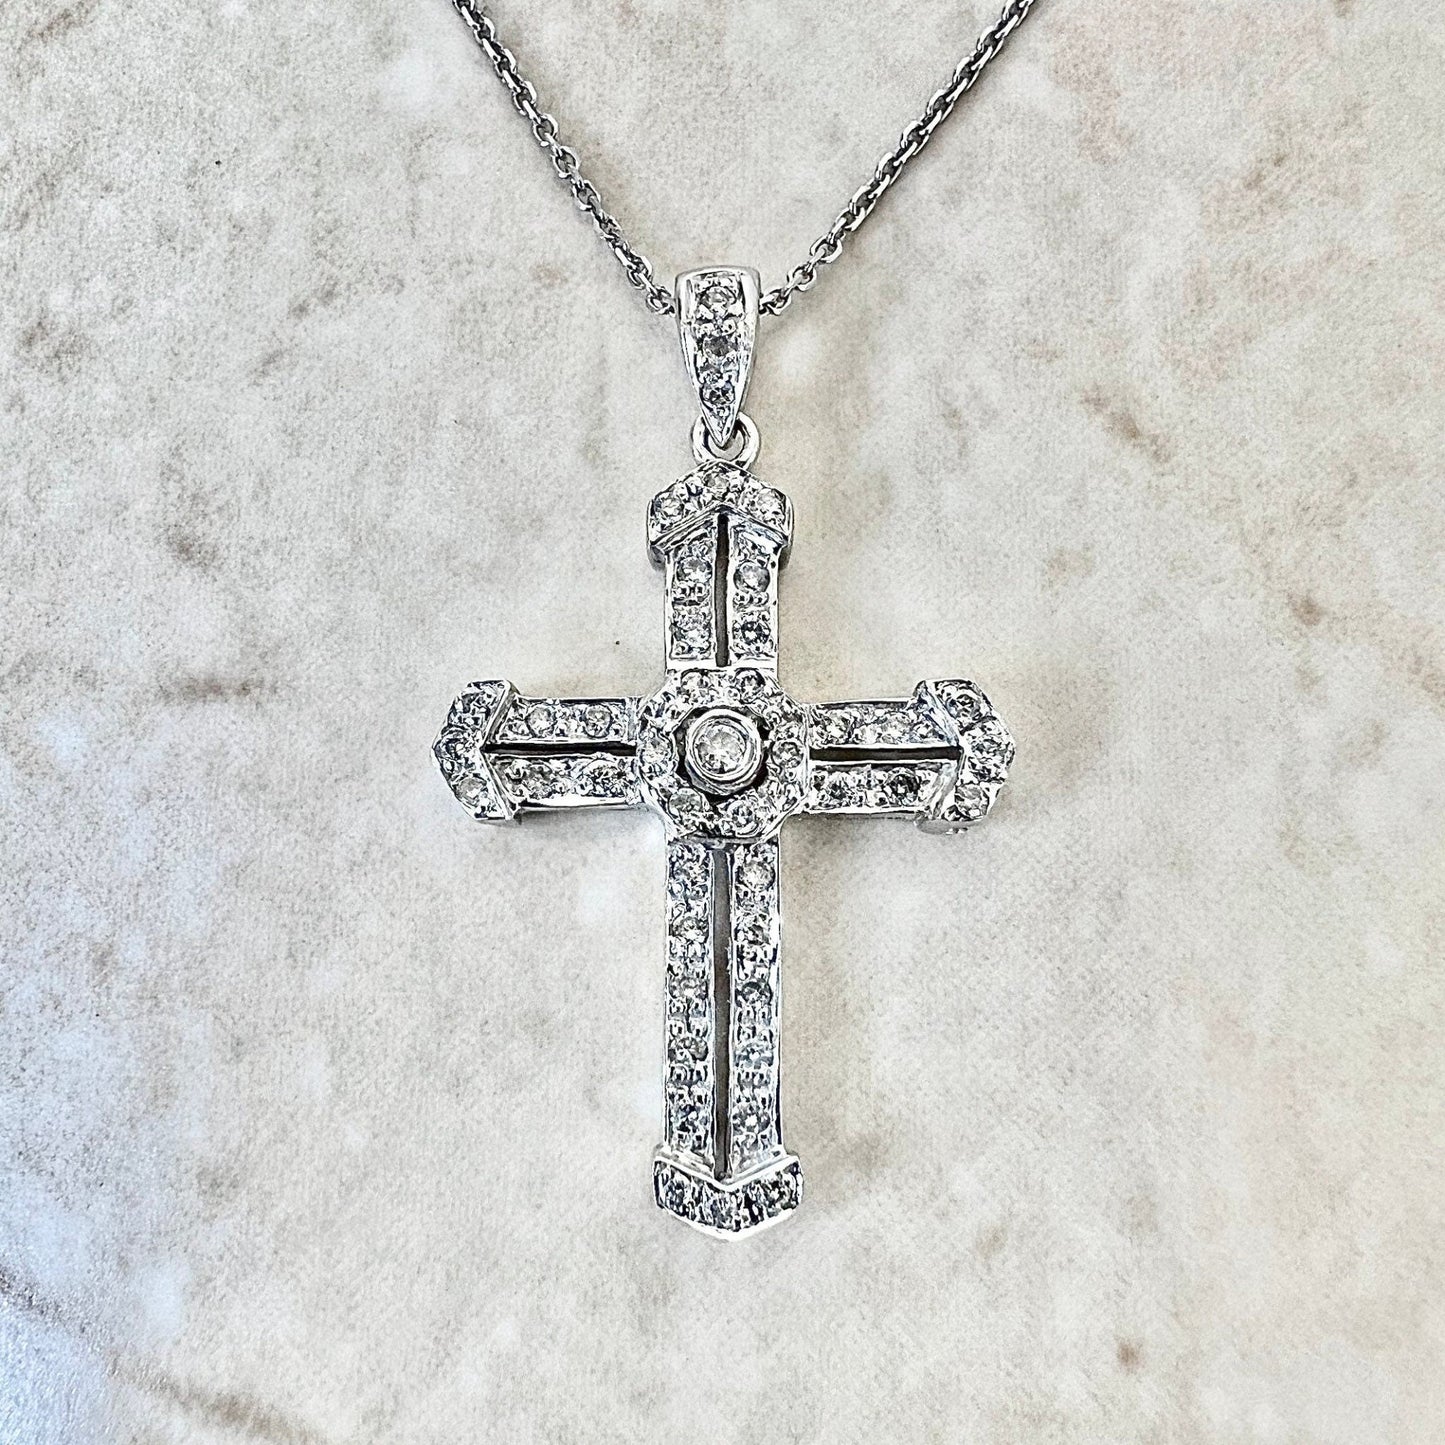 Vintage 18K Diamond Cross Pendant Necklace - White Gold Cross - Diamond Necklace - Religious Jewelry - Christmas Gift For Her -Jewelry Sale